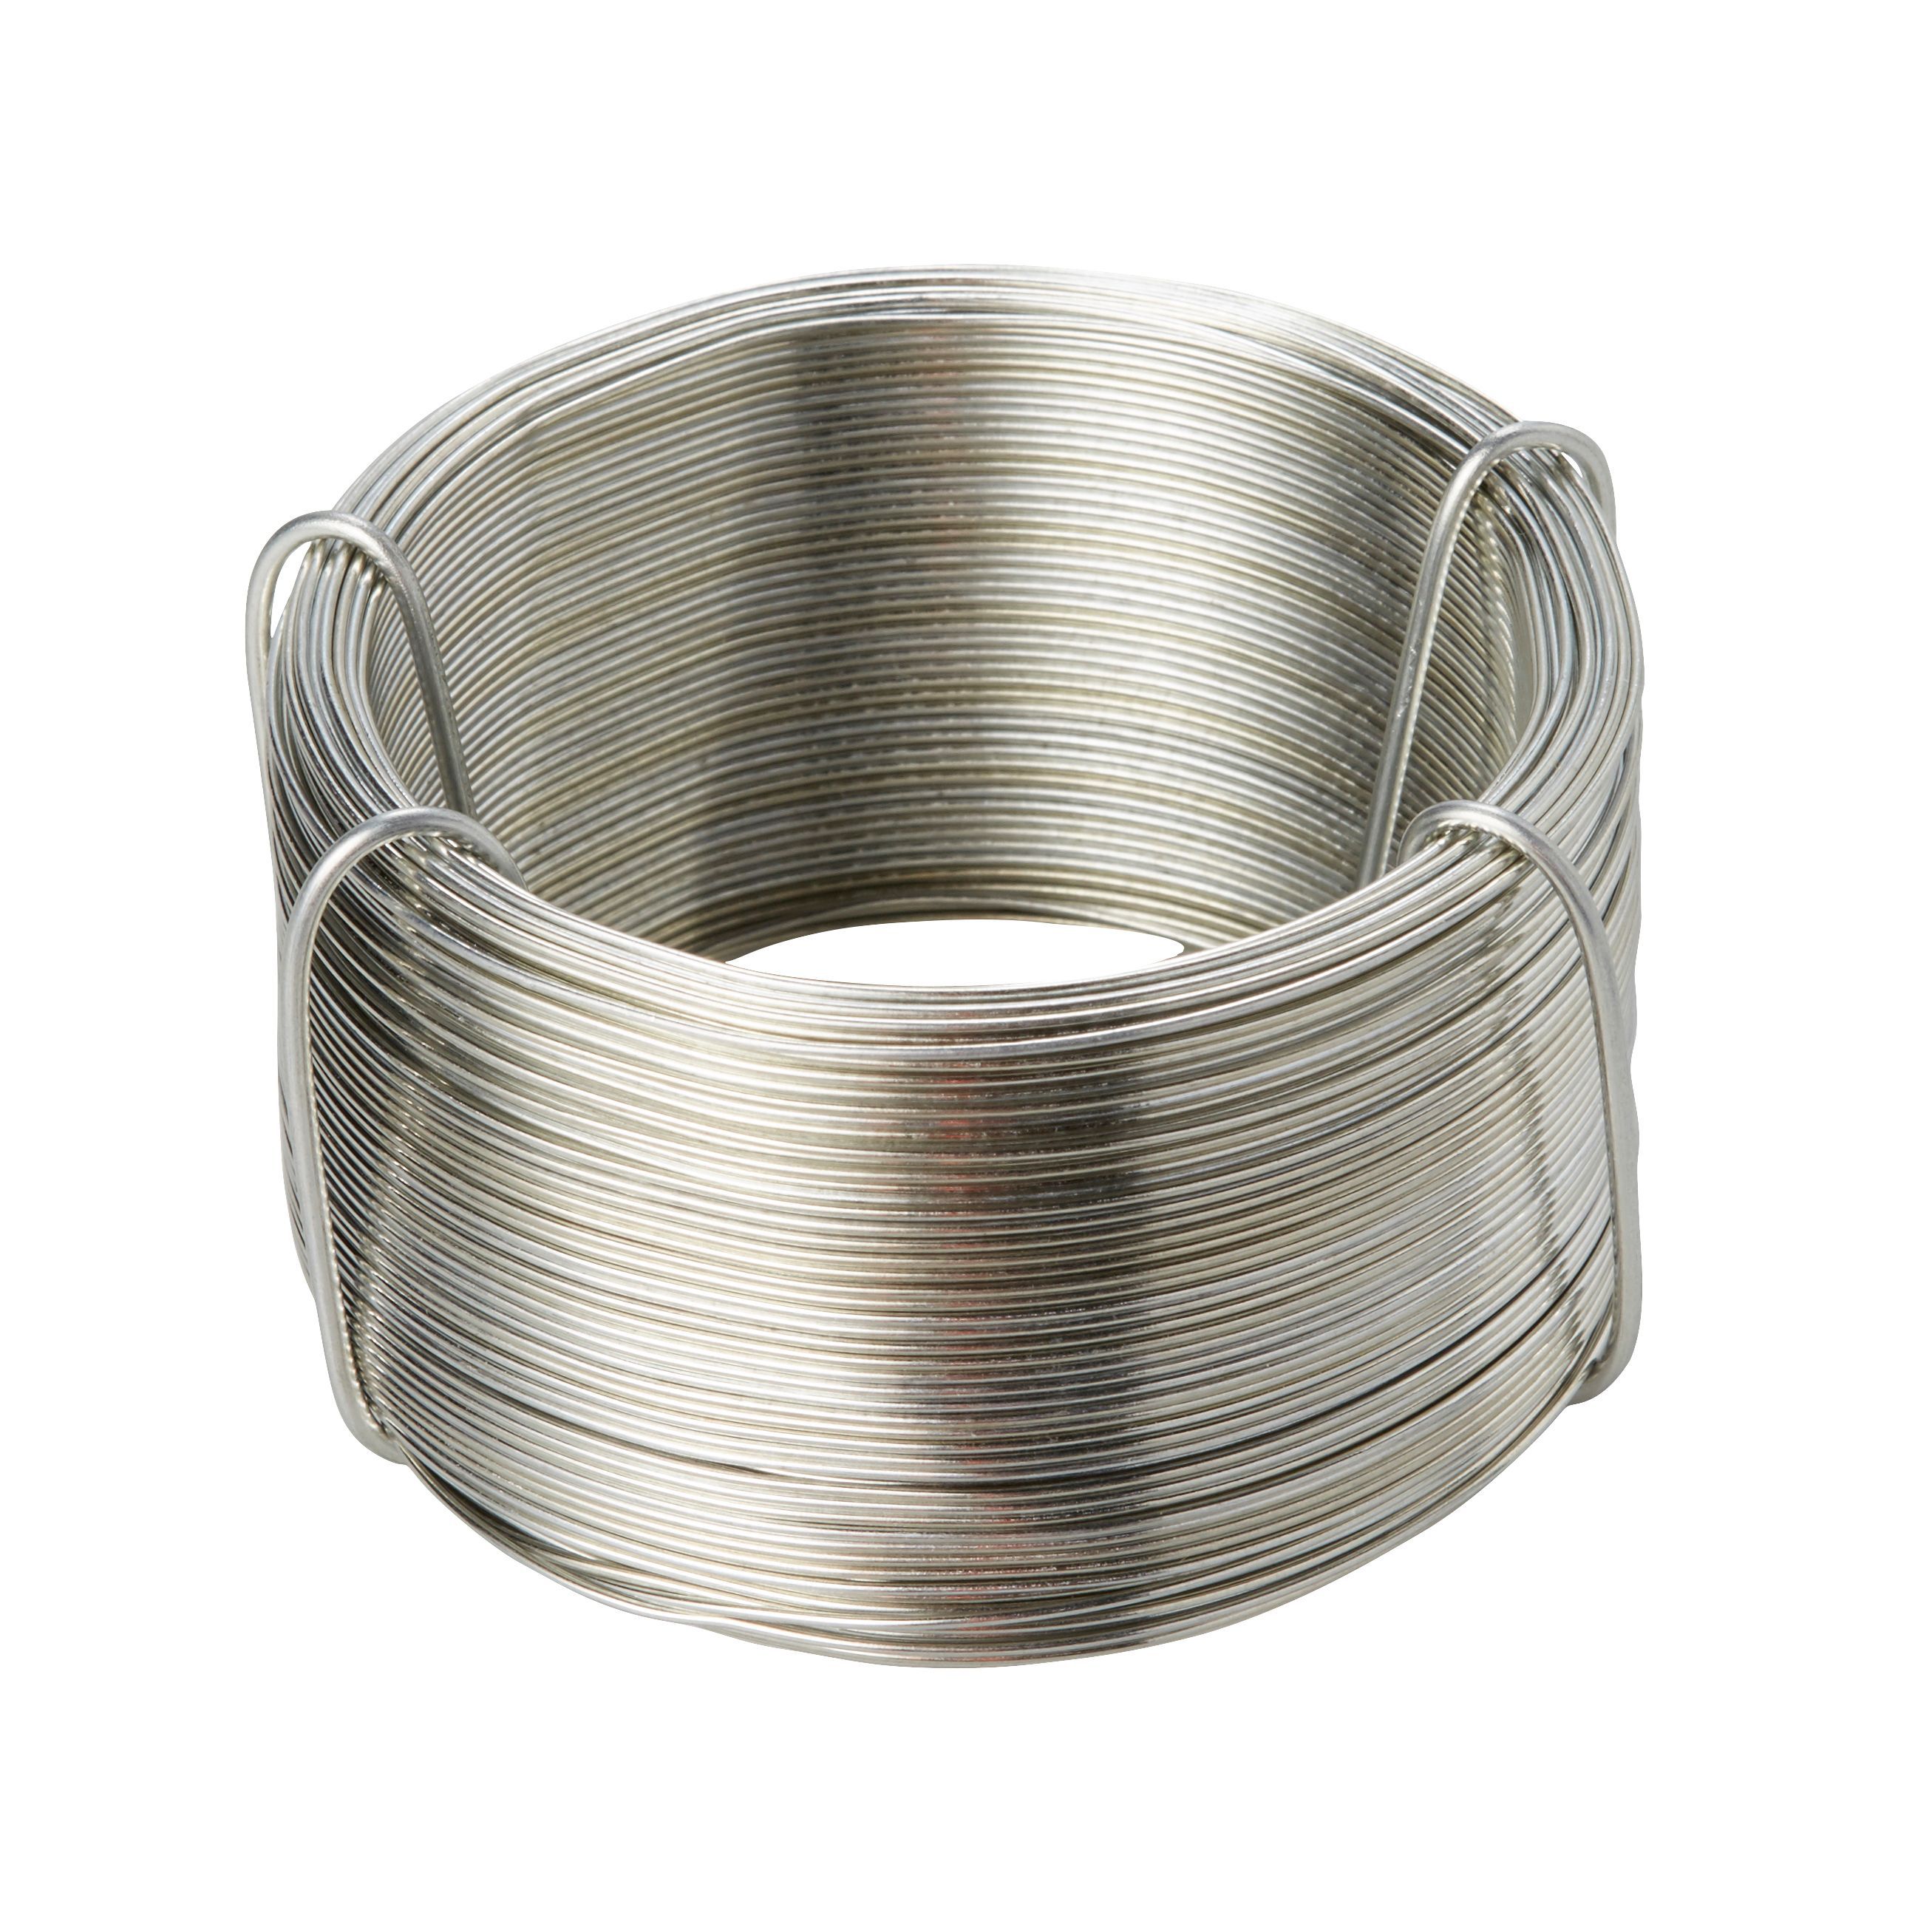 Stainless steel wire 0.9mm/5m